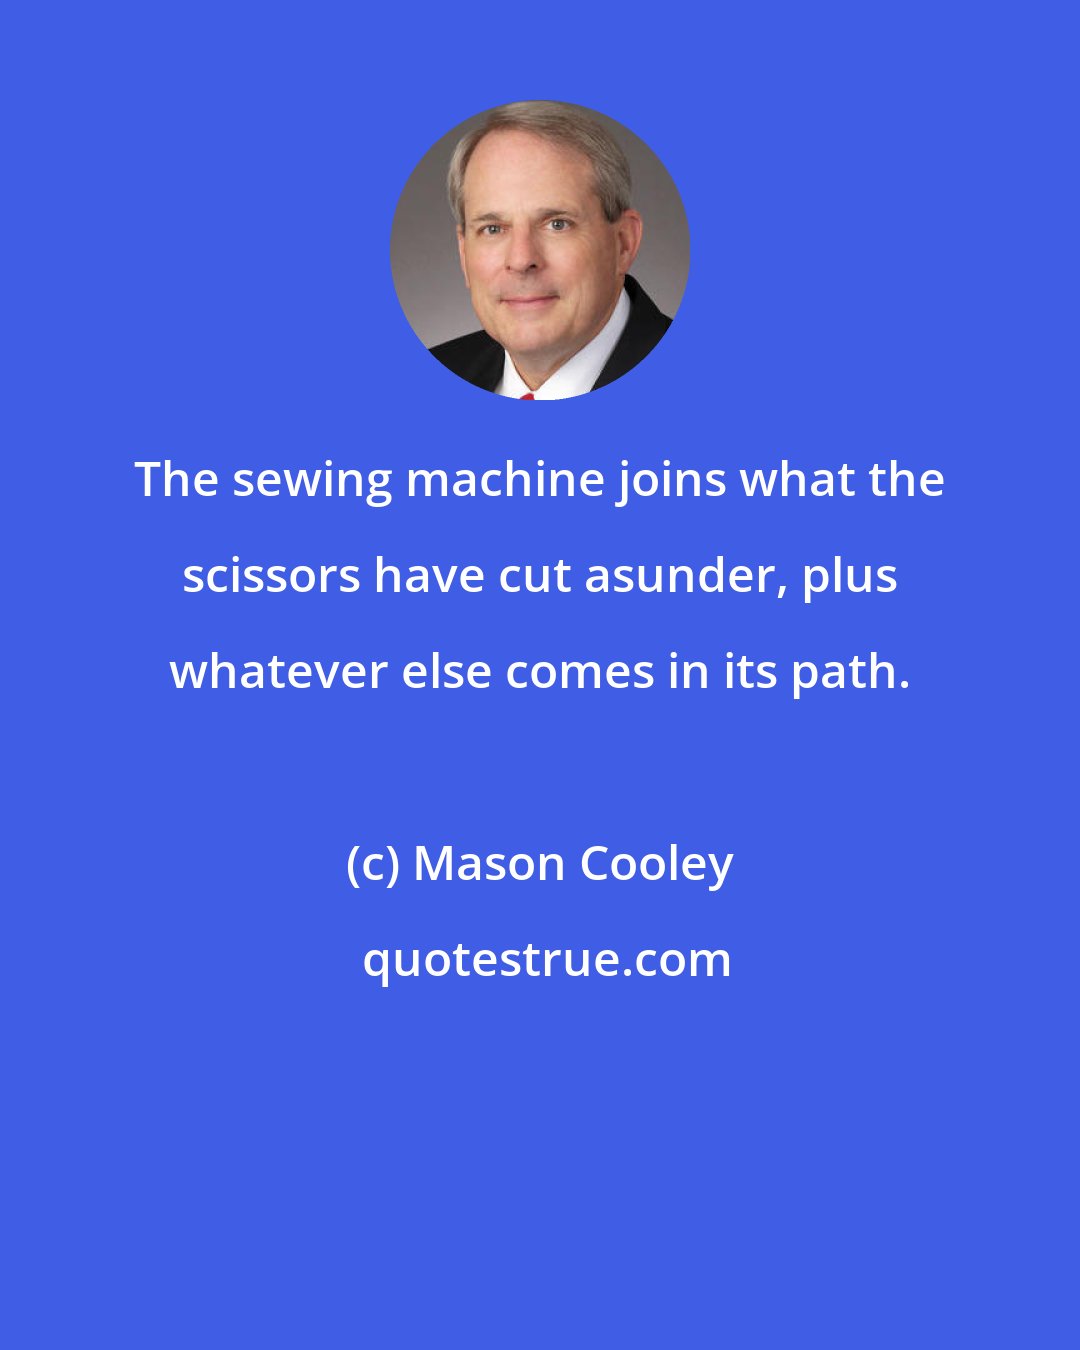 Mason Cooley: The sewing machine joins what the scissors have cut asunder, plus whatever else comes in its path.